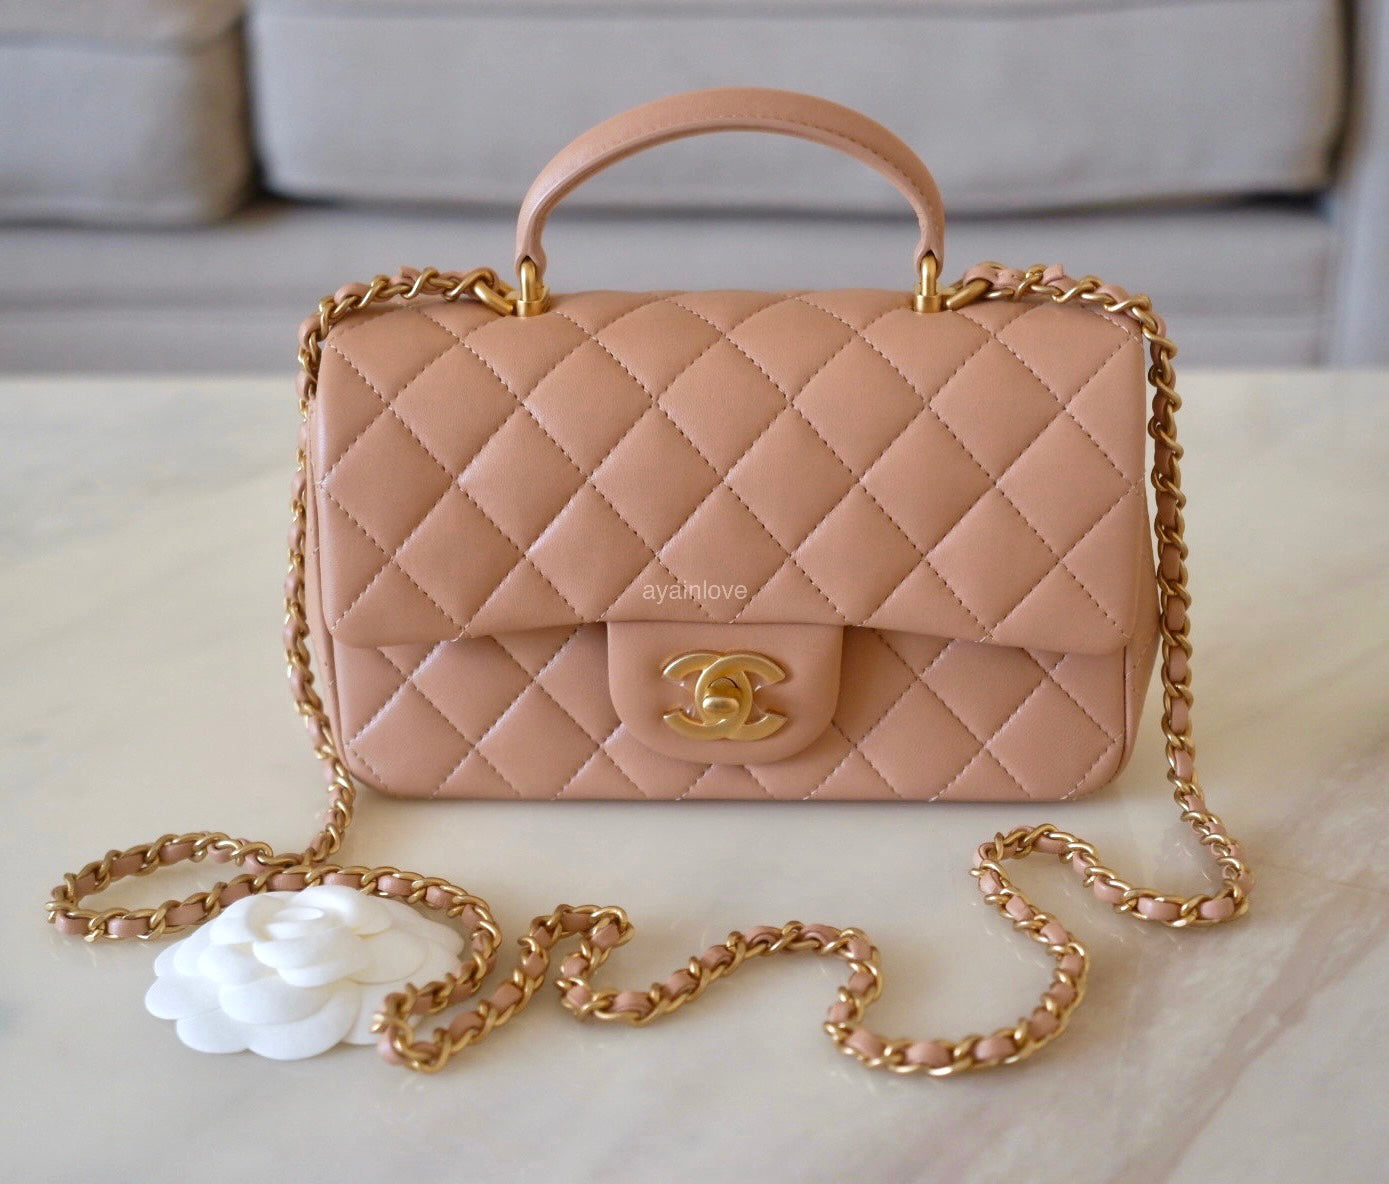 Best Deals for Chanel Small Flap Bag Price